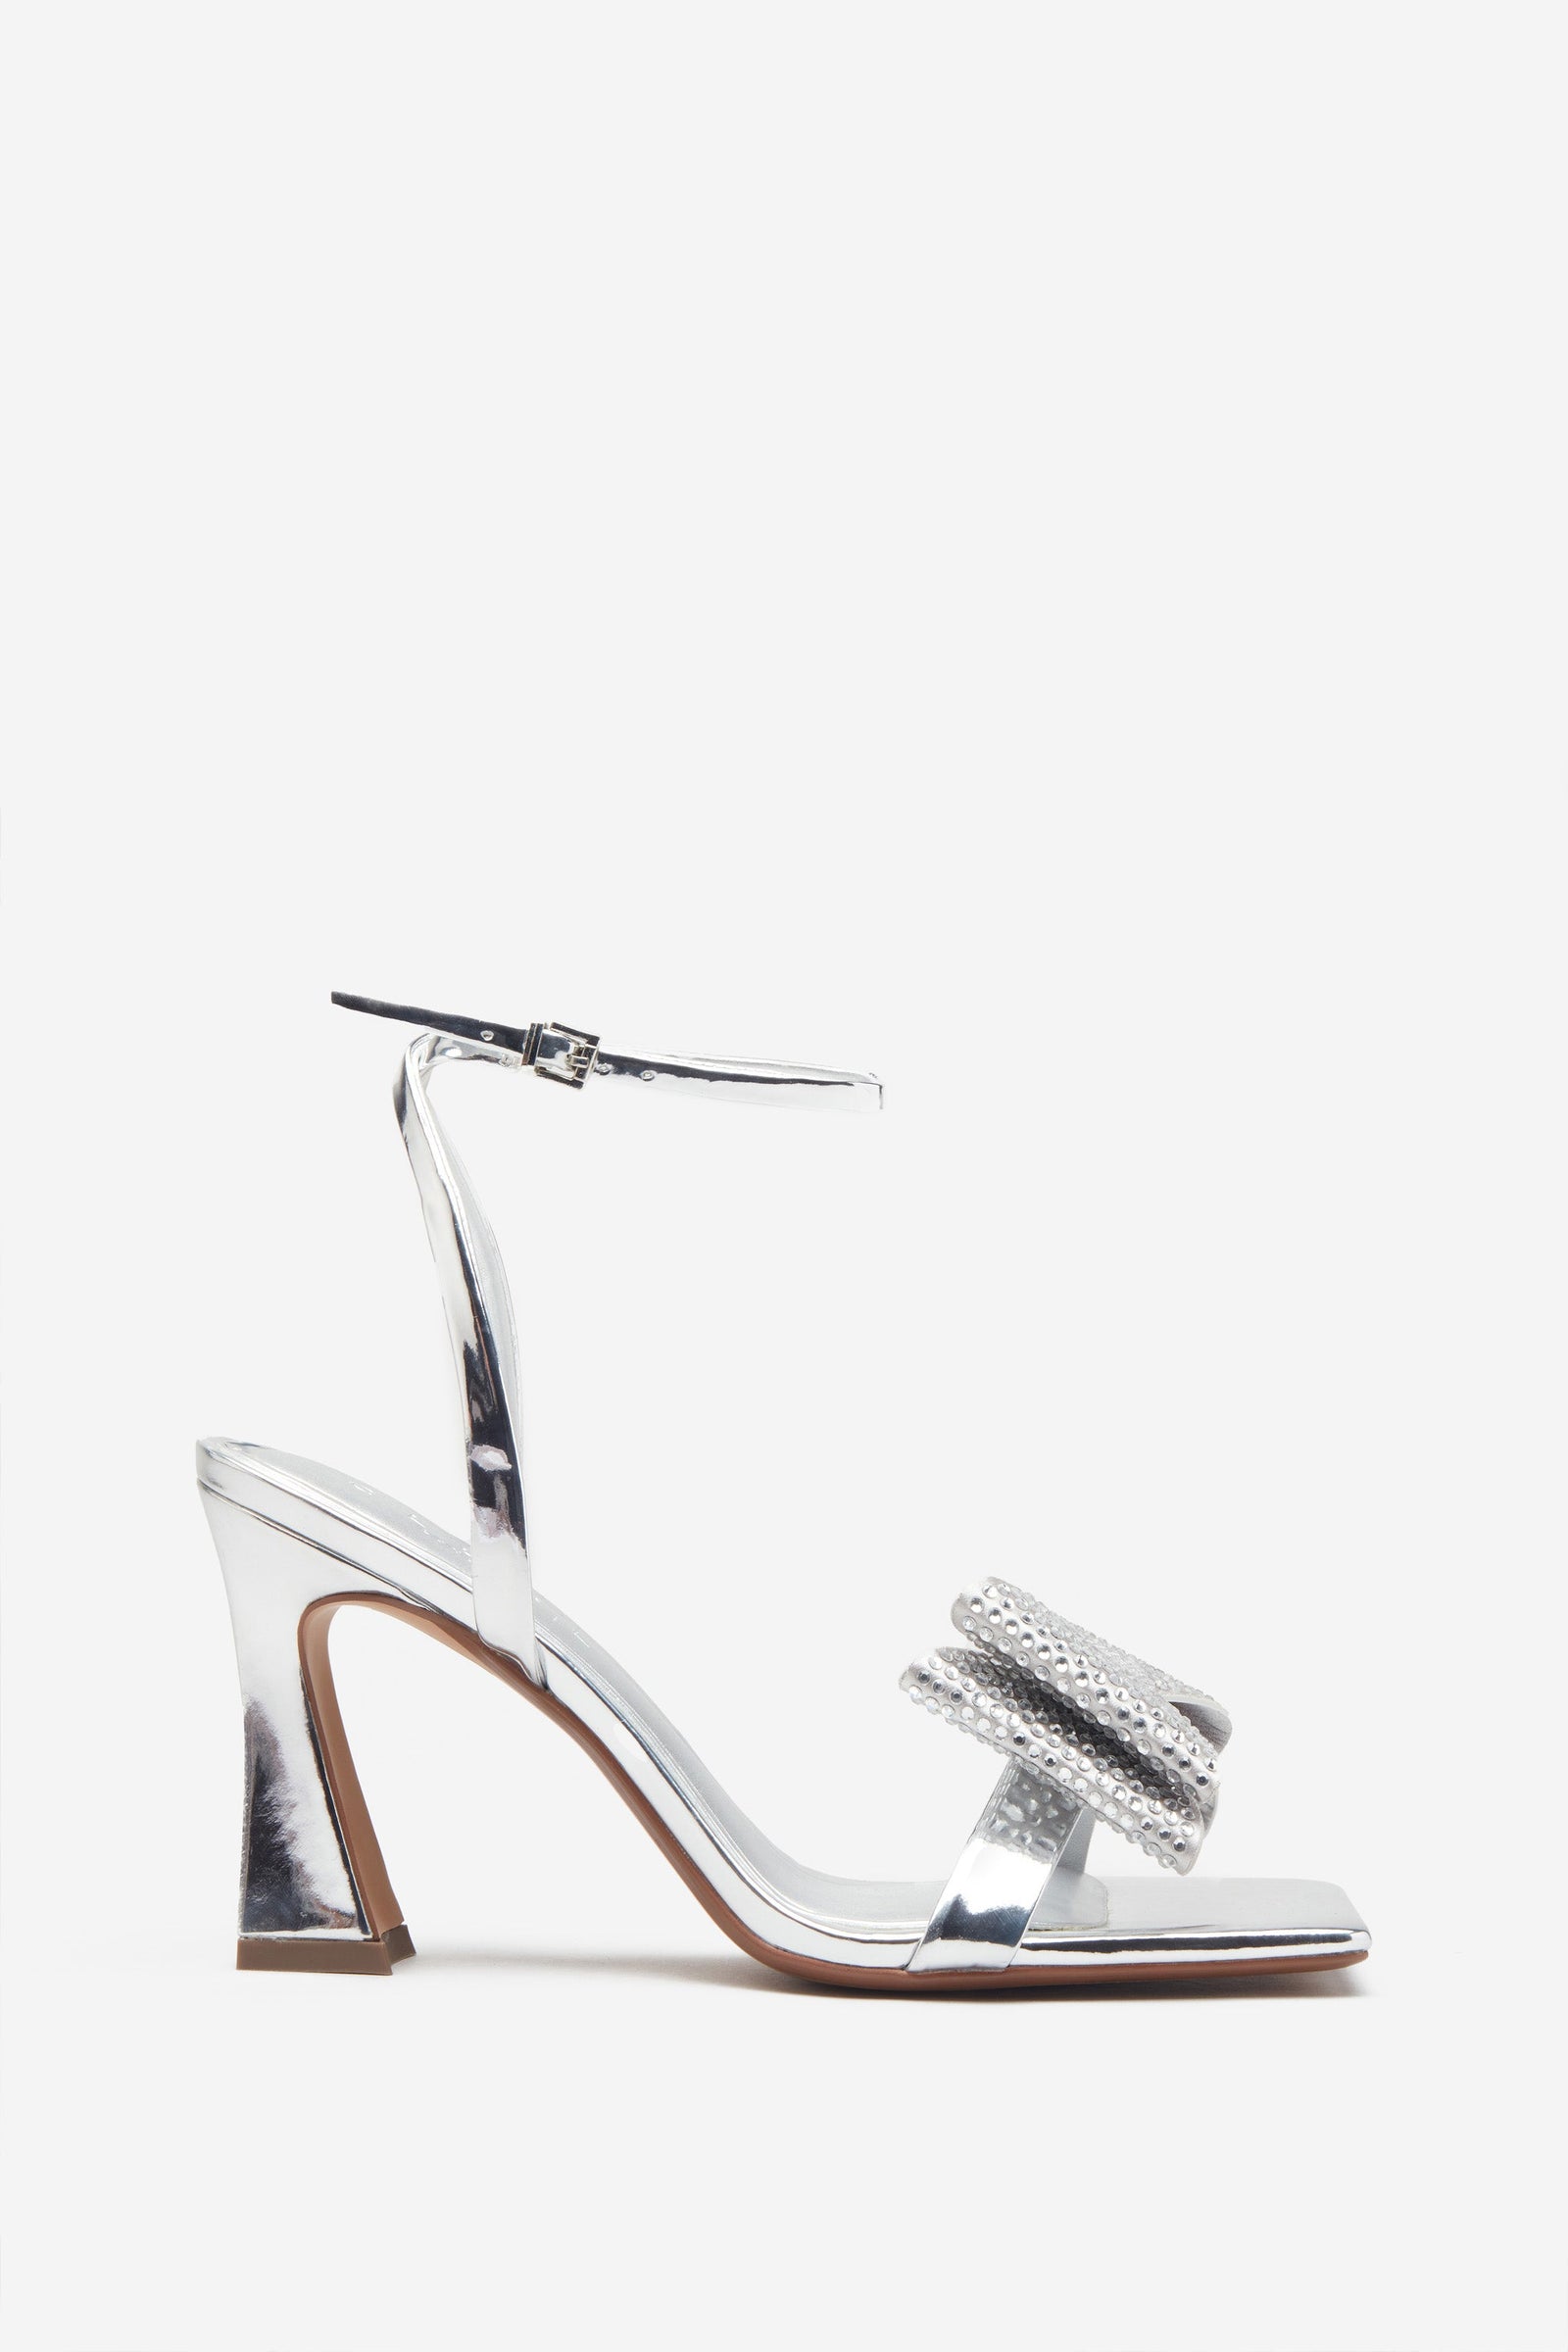 Luxury Dahlia Crystal Glass Silver Strappy Sandals With Lambskin Lining  Perfect For Parties, Weddings, And Summer Black, White, Pink High Heels  Ladies Pumps In EU Sizes 35 40 From Redsneakercode, $24.14 | DHgate.Com